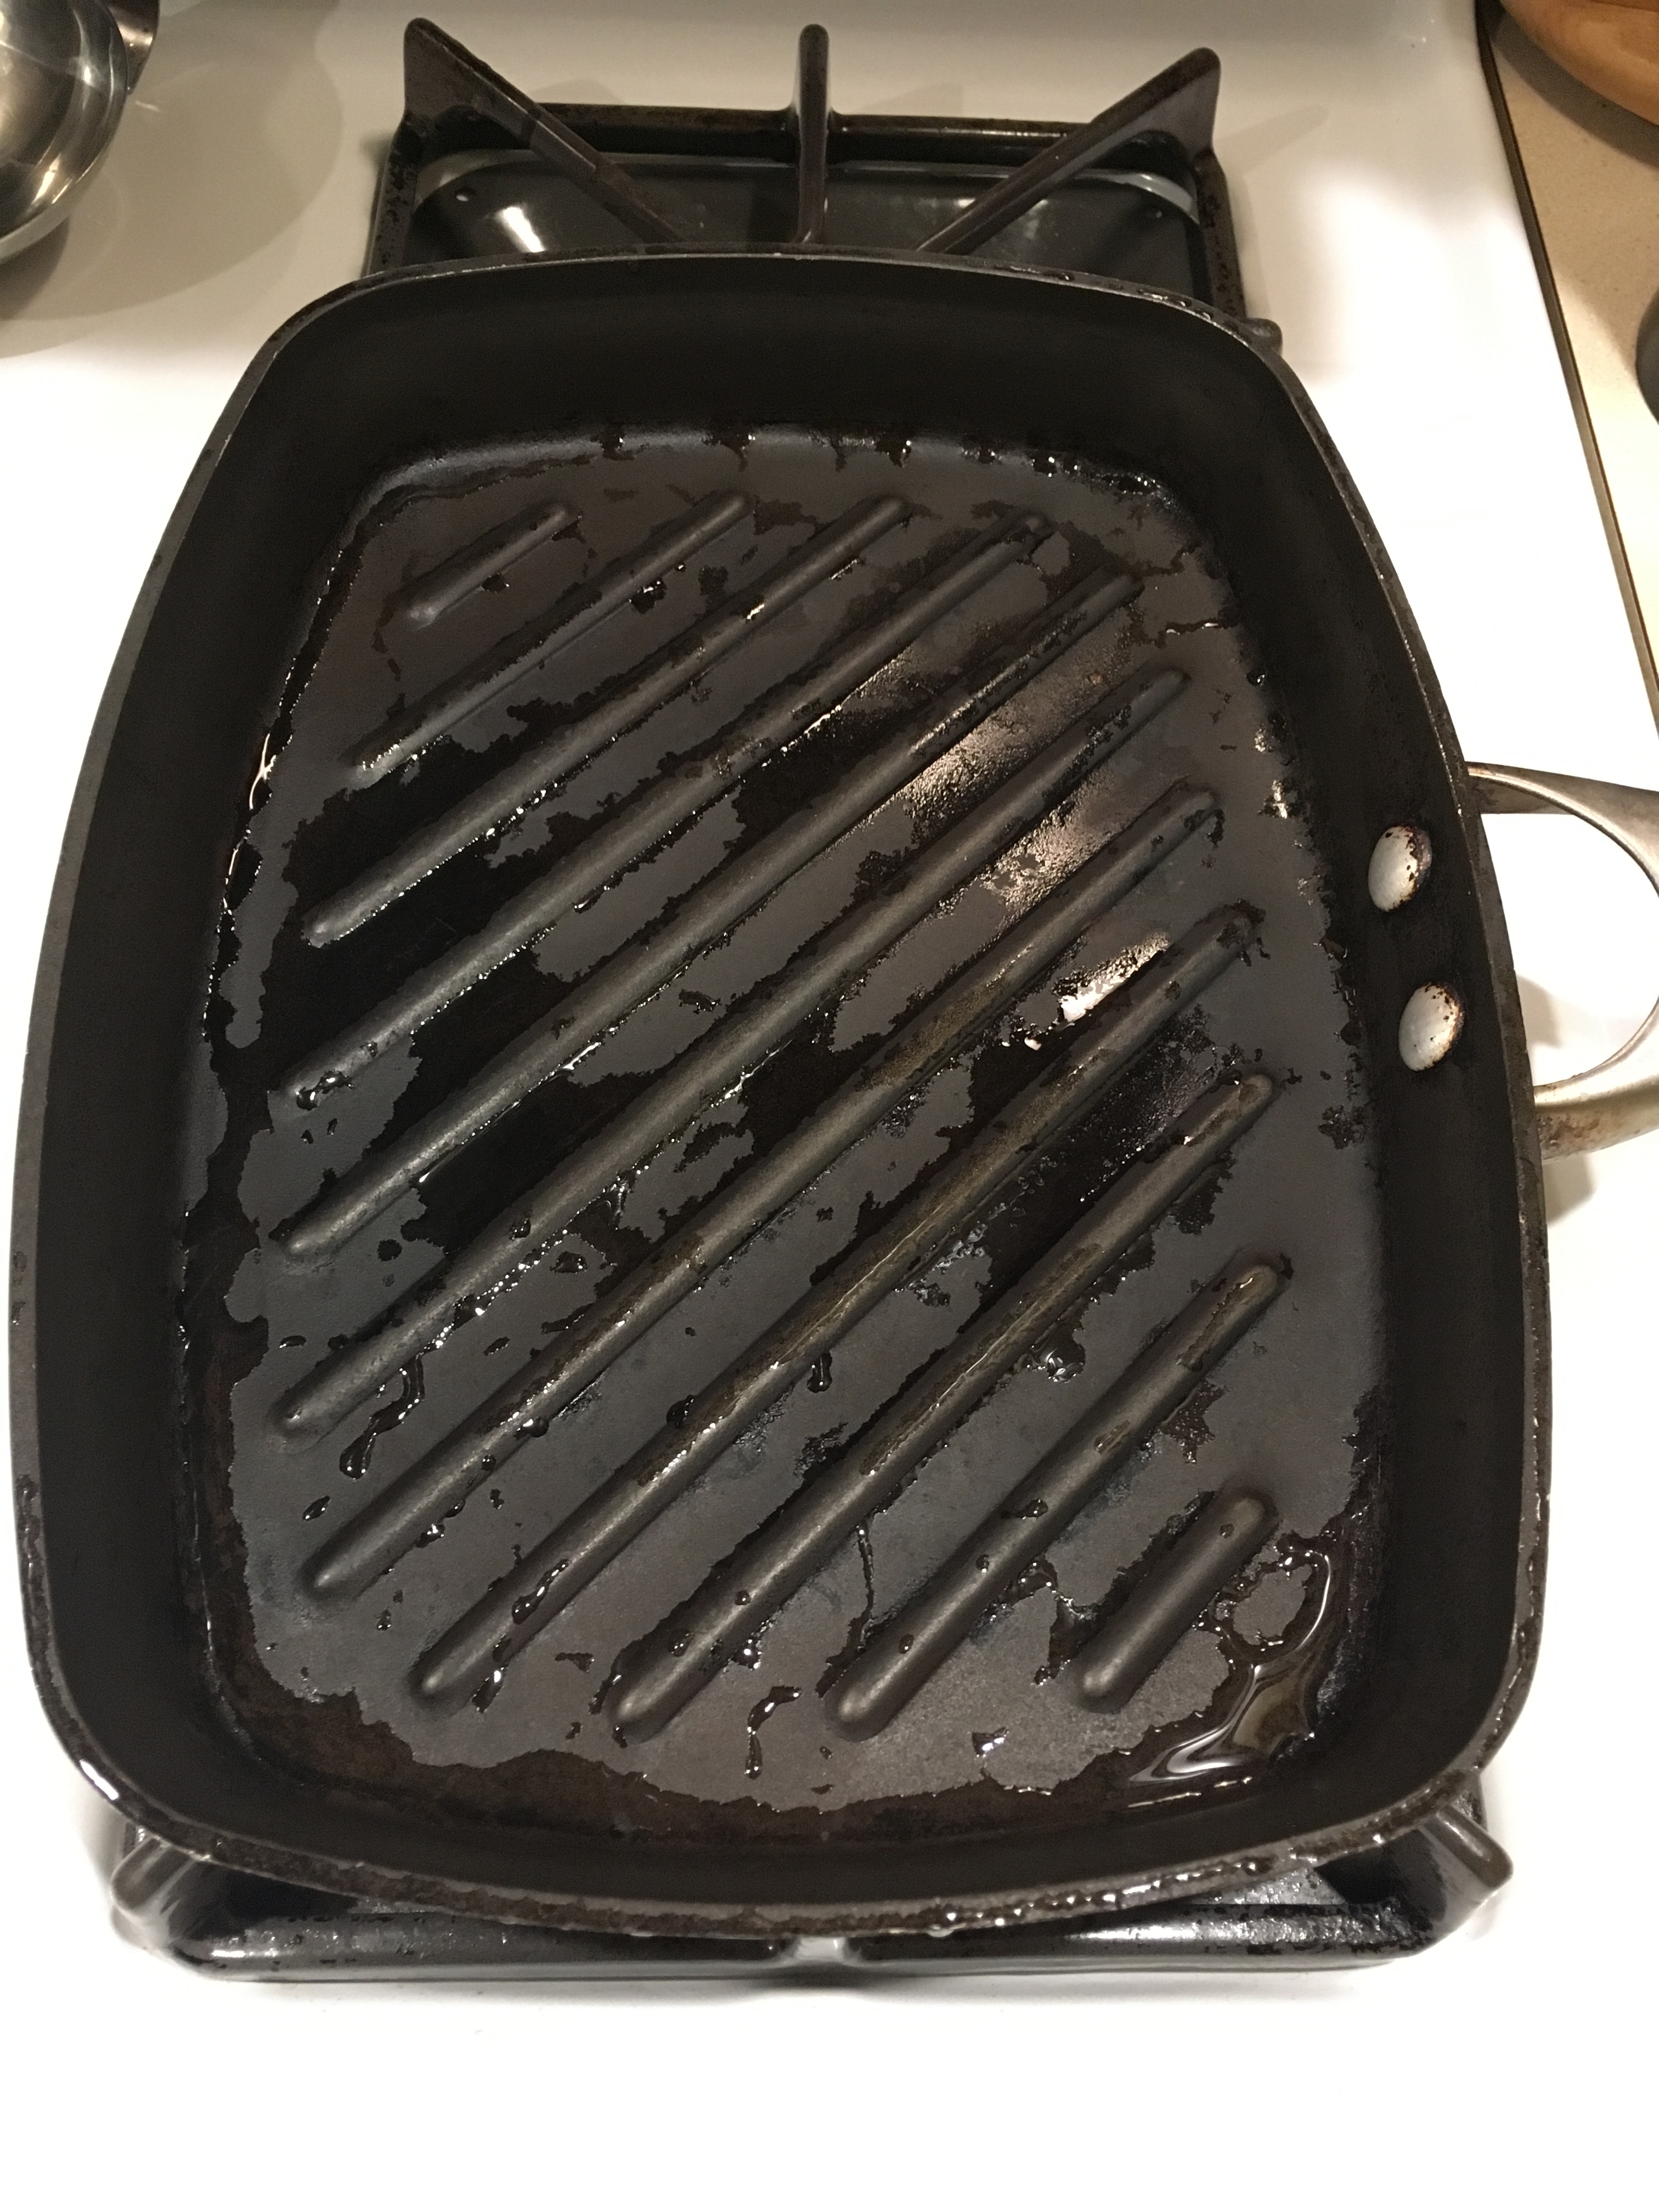 A panini grill pan gives you those beautiful lines across whatever you are grilling indoors on the stove. 